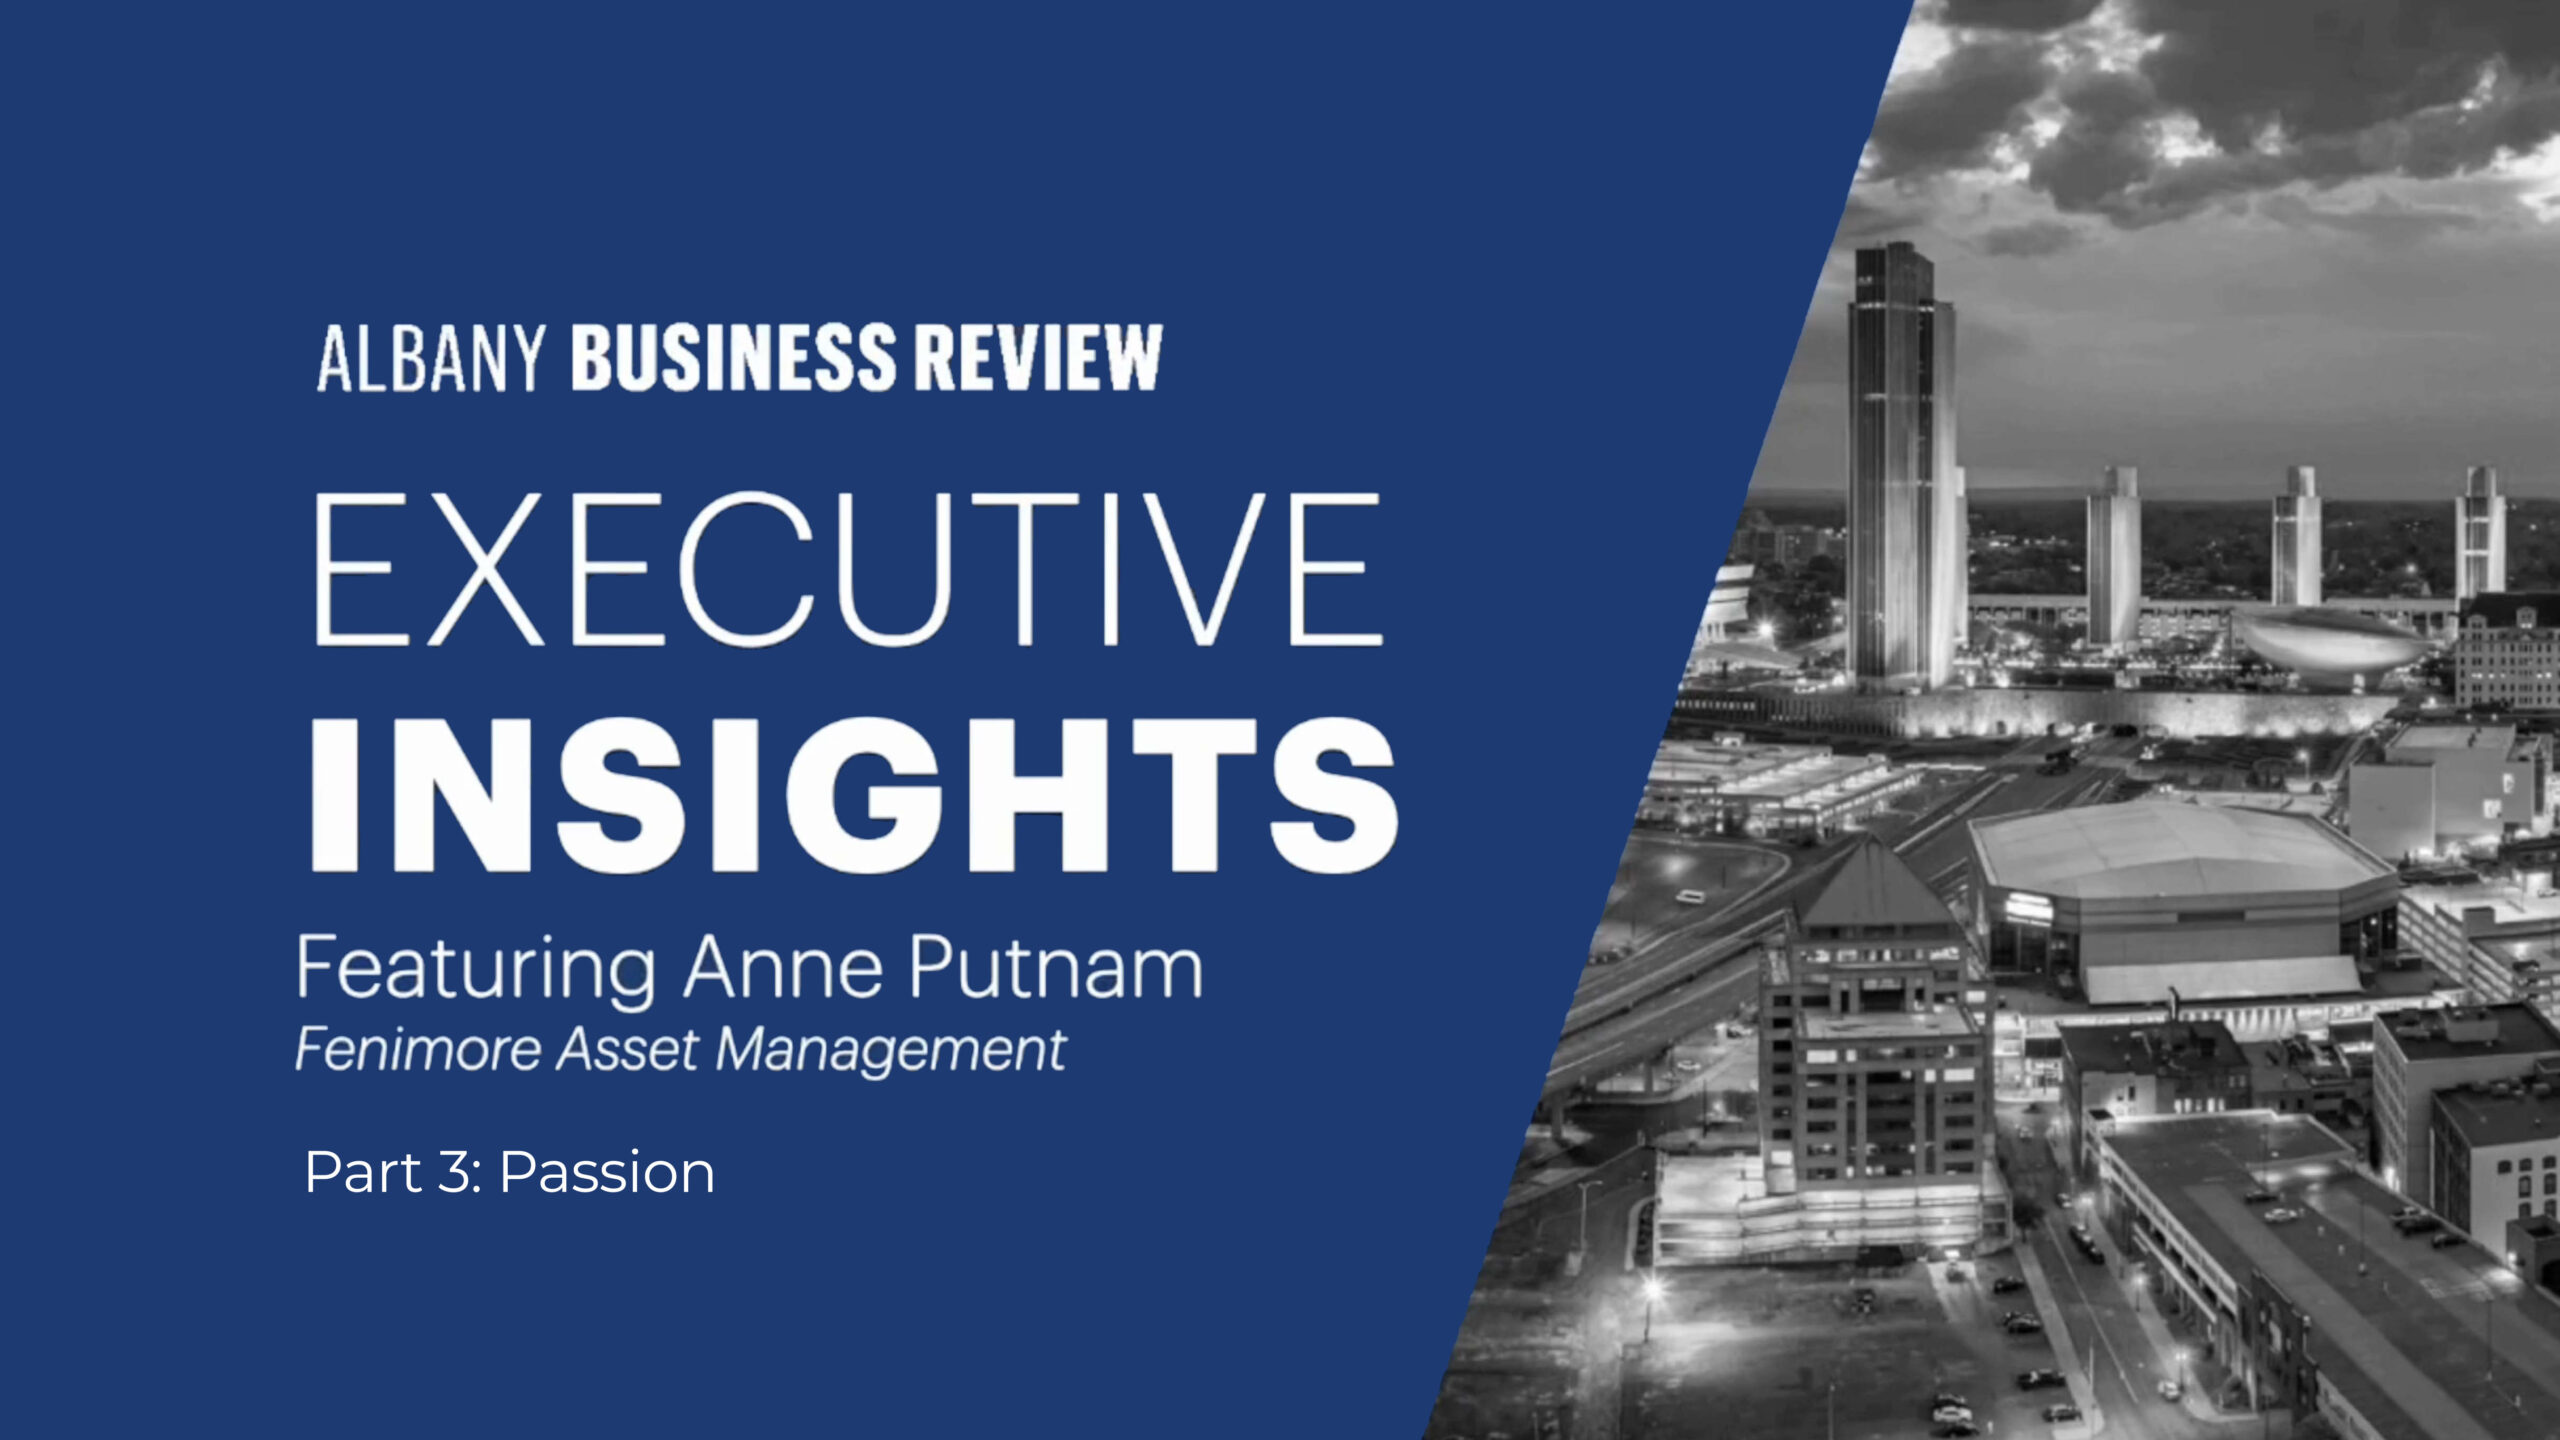 Part Three: CEO Anne Putnam Discusses Her Passion for Fenimore with Walter Thorne – Albany Executive Insights